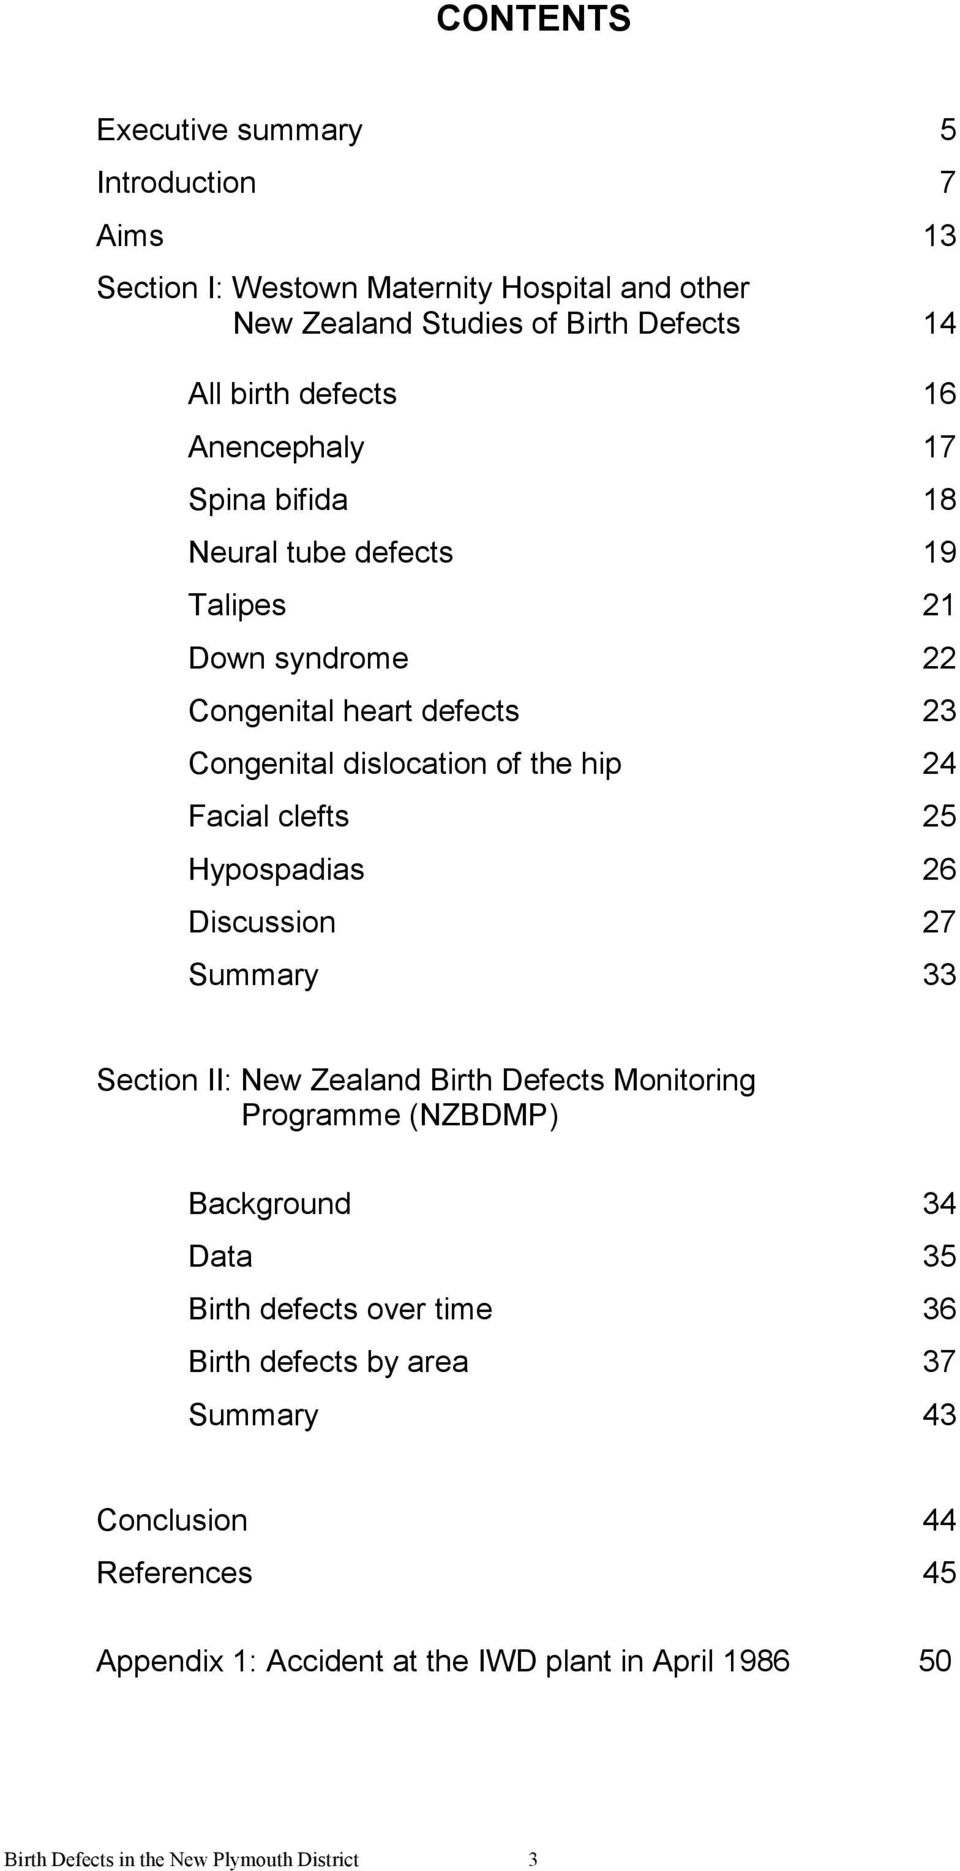 7 13 14 16 17 18 19 21 22 23 24 25 26 27 33 Section II: New Zealand Birth Defects Monitoring Programme (NZBDMP) Background Data Birth defects over time Birth